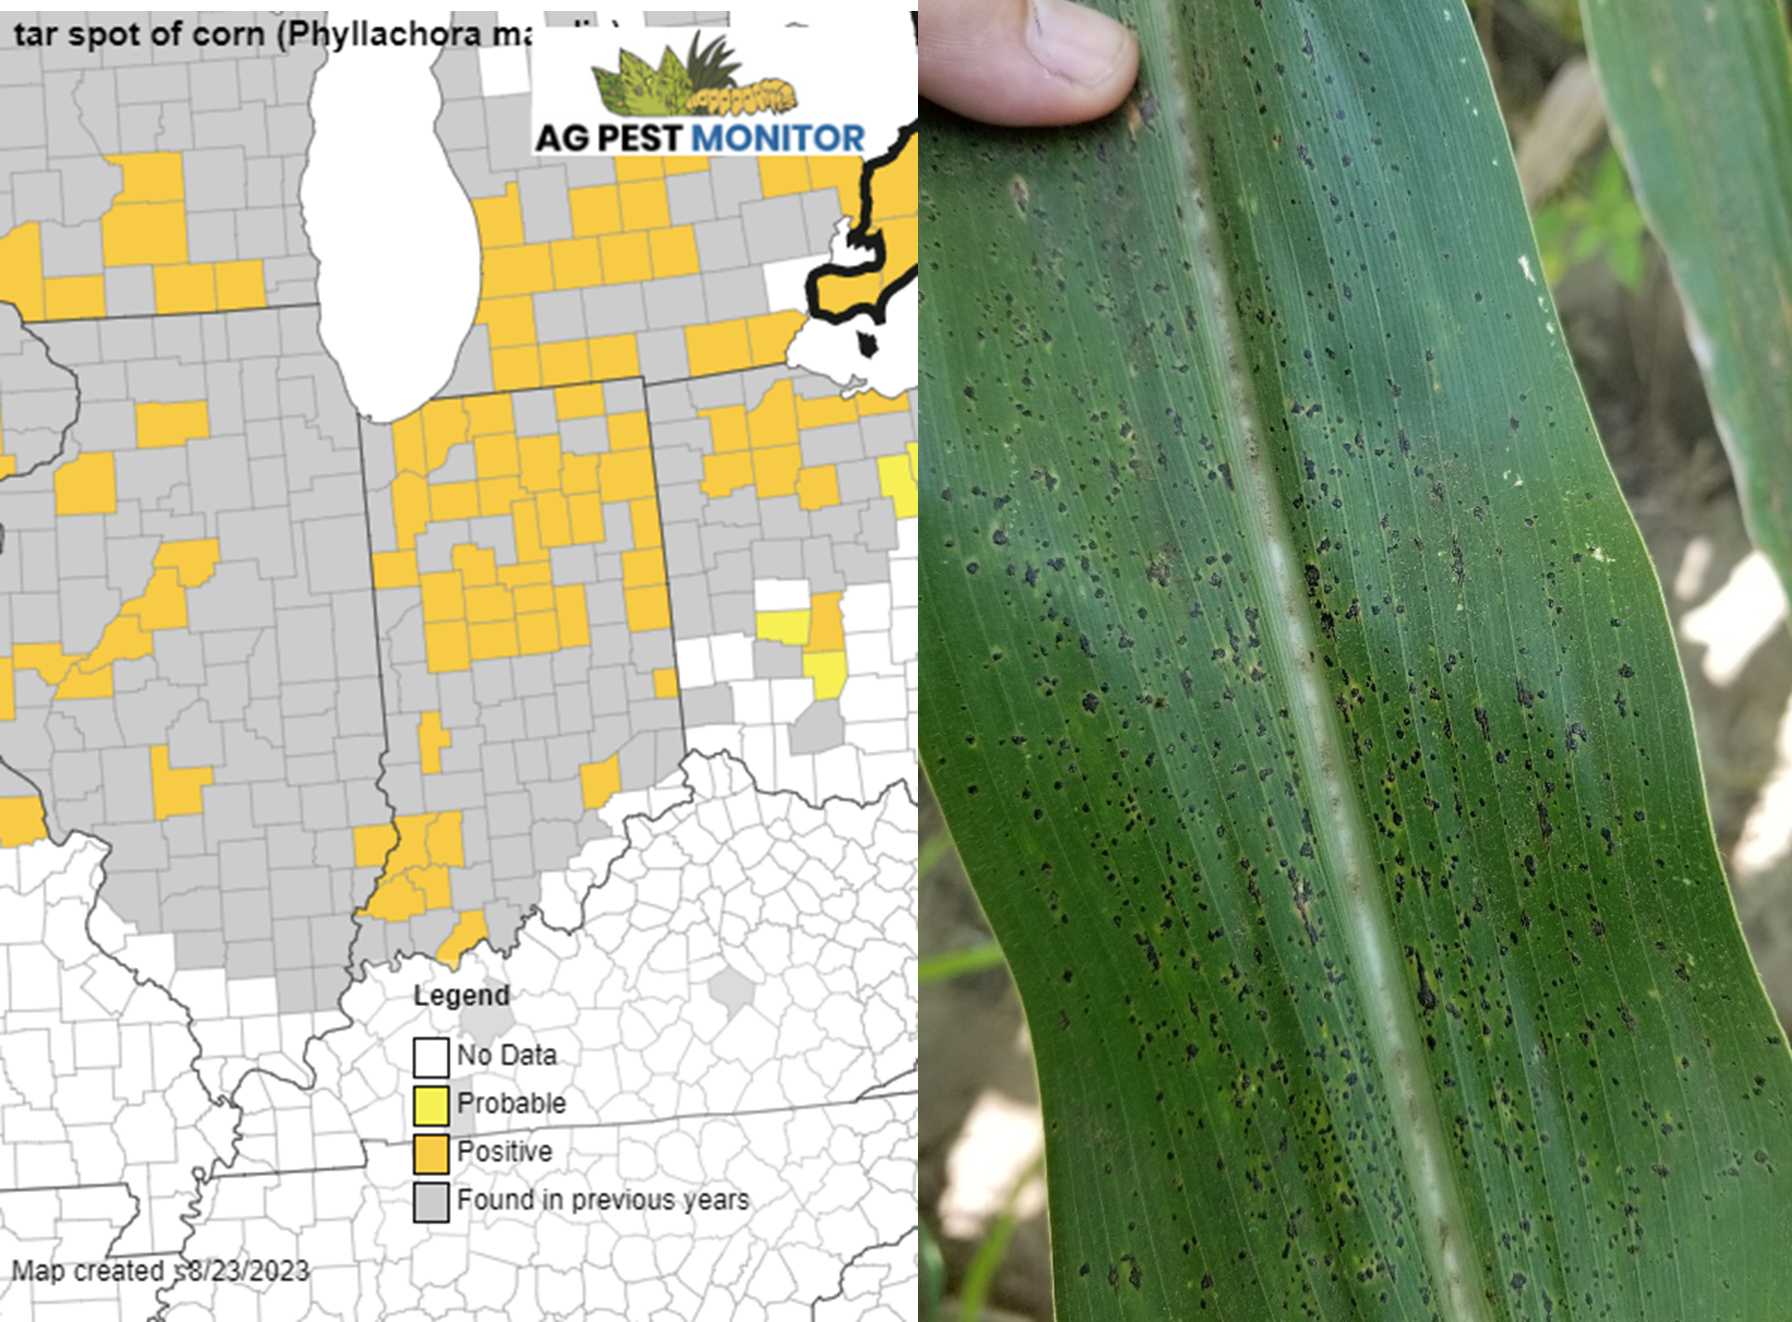 Figure 2. August 23, 2023 map of tar spot (Phyllachora maydis) and image of an infected leaf. 